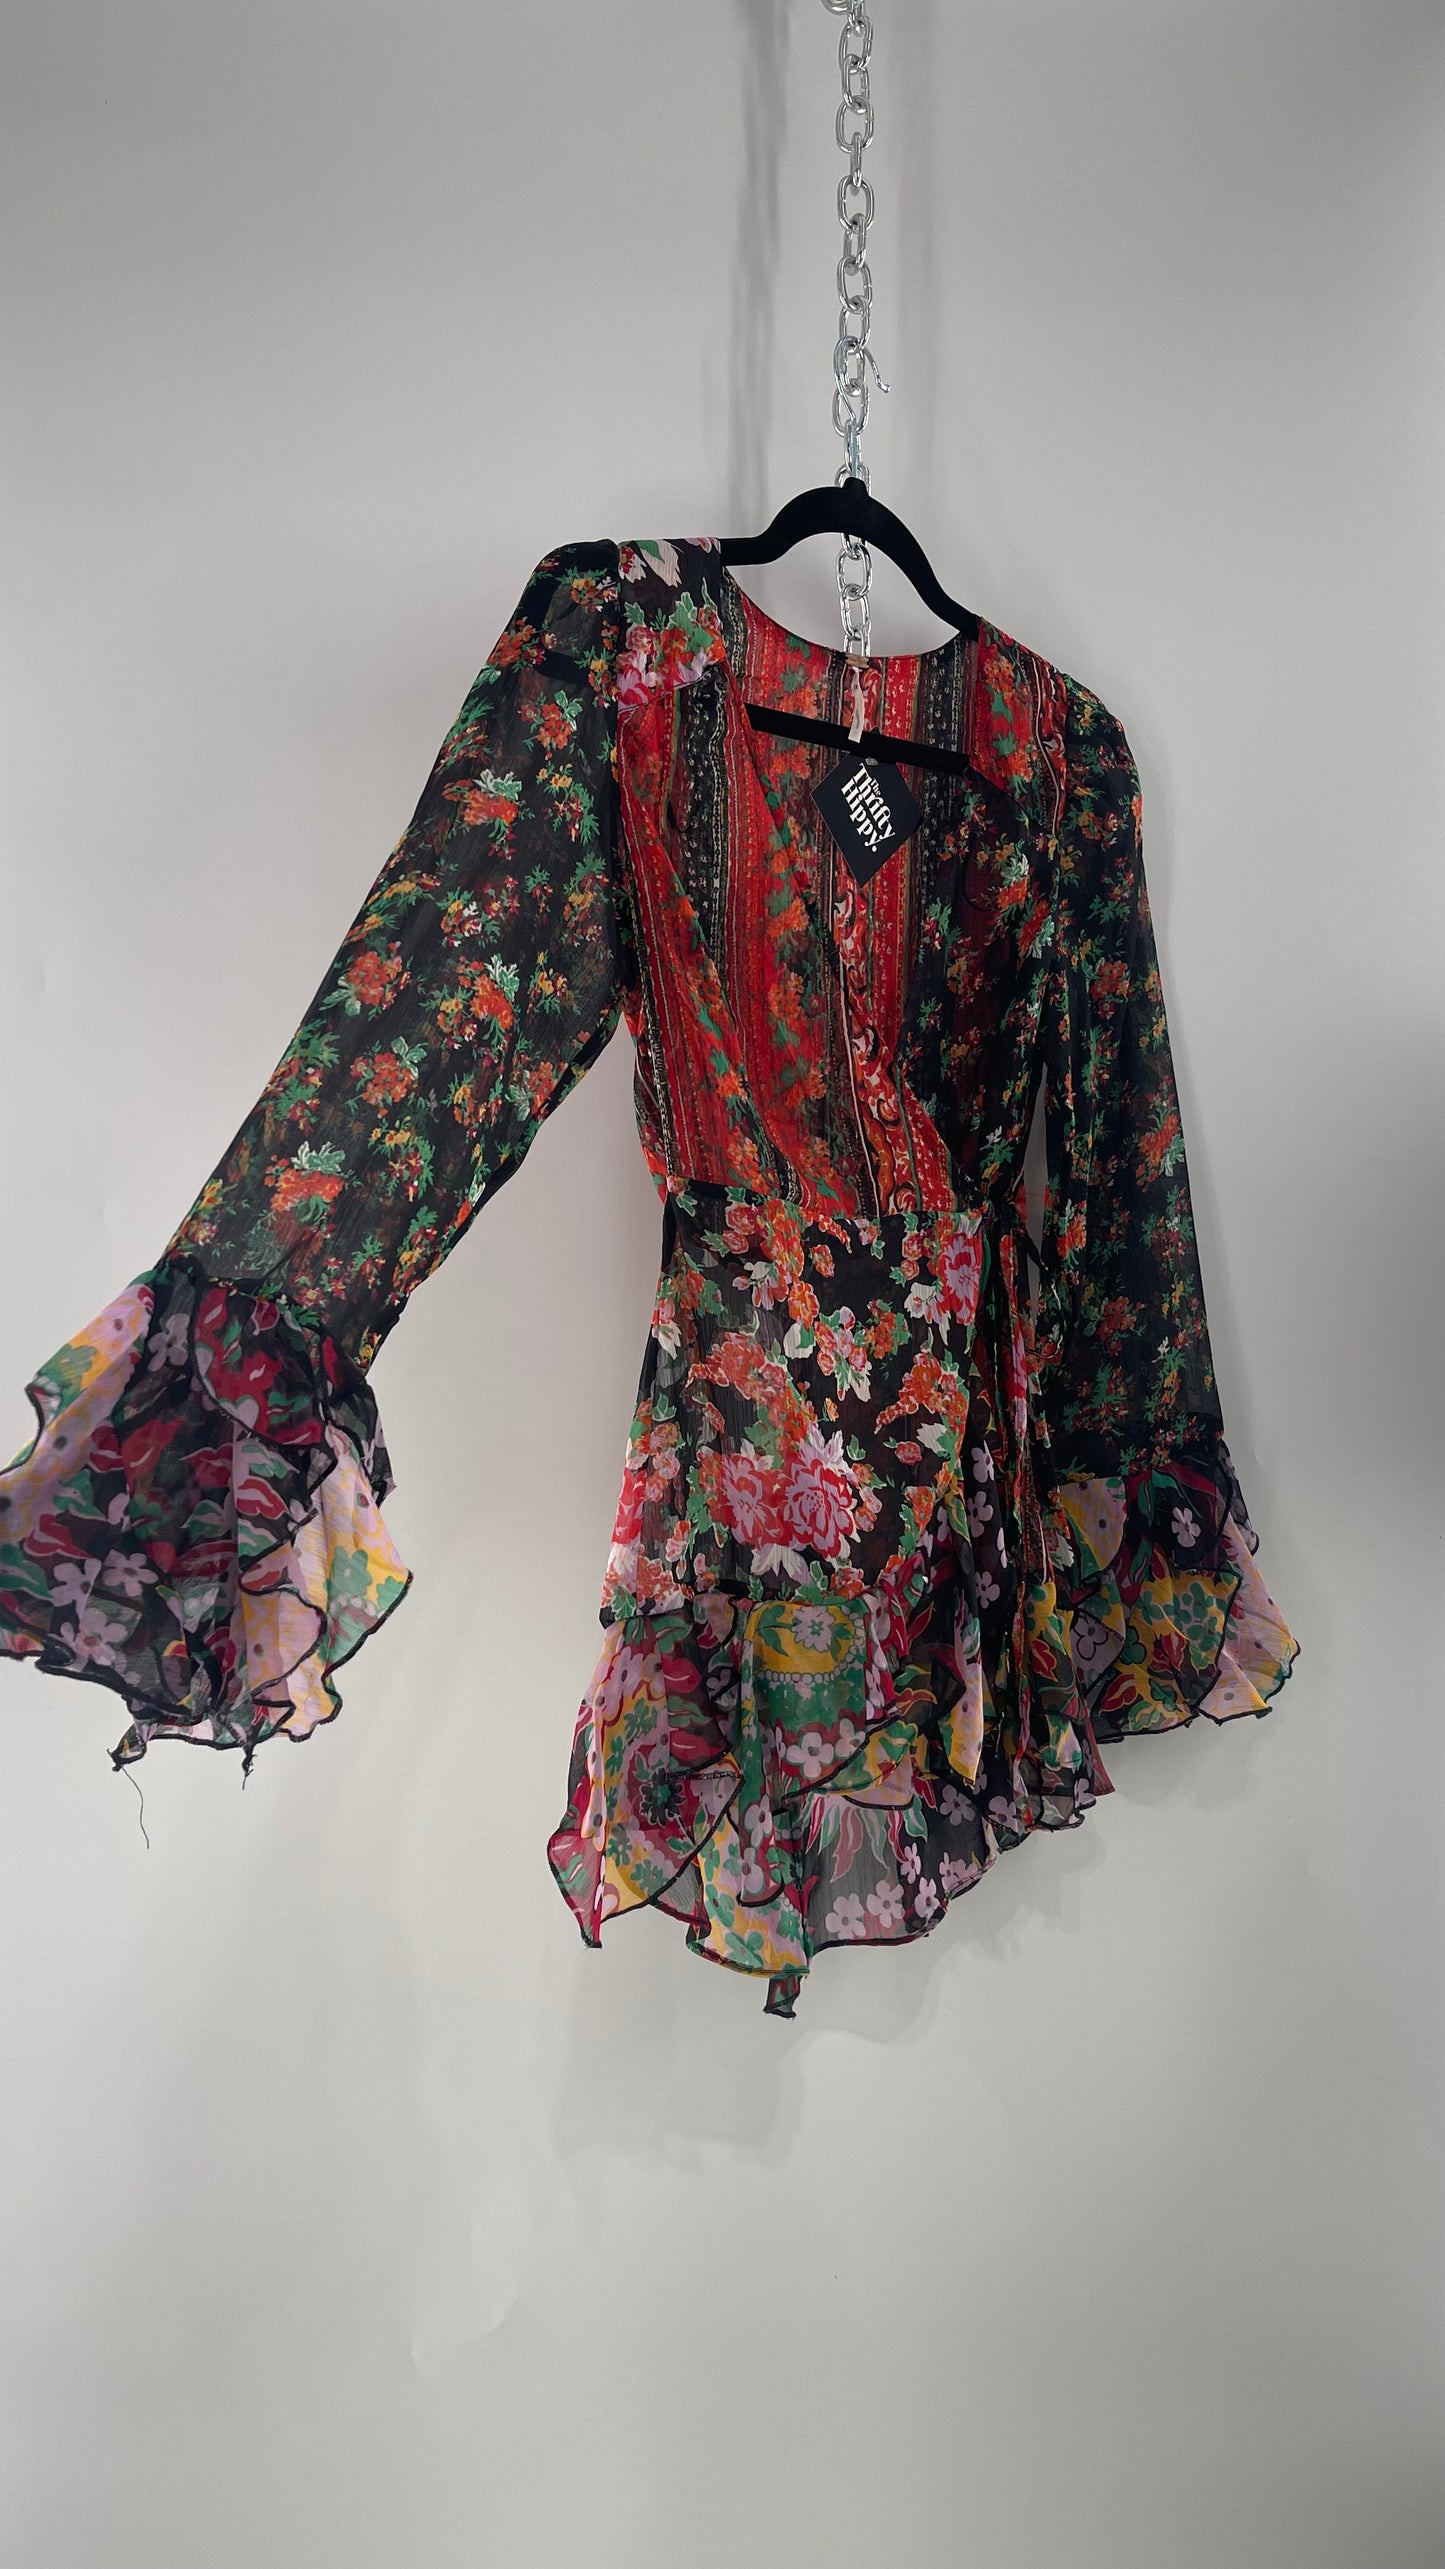 Free People Black Colorful Floral Tie Front Blouse with Ruffled Sleeves and Hem(XS)